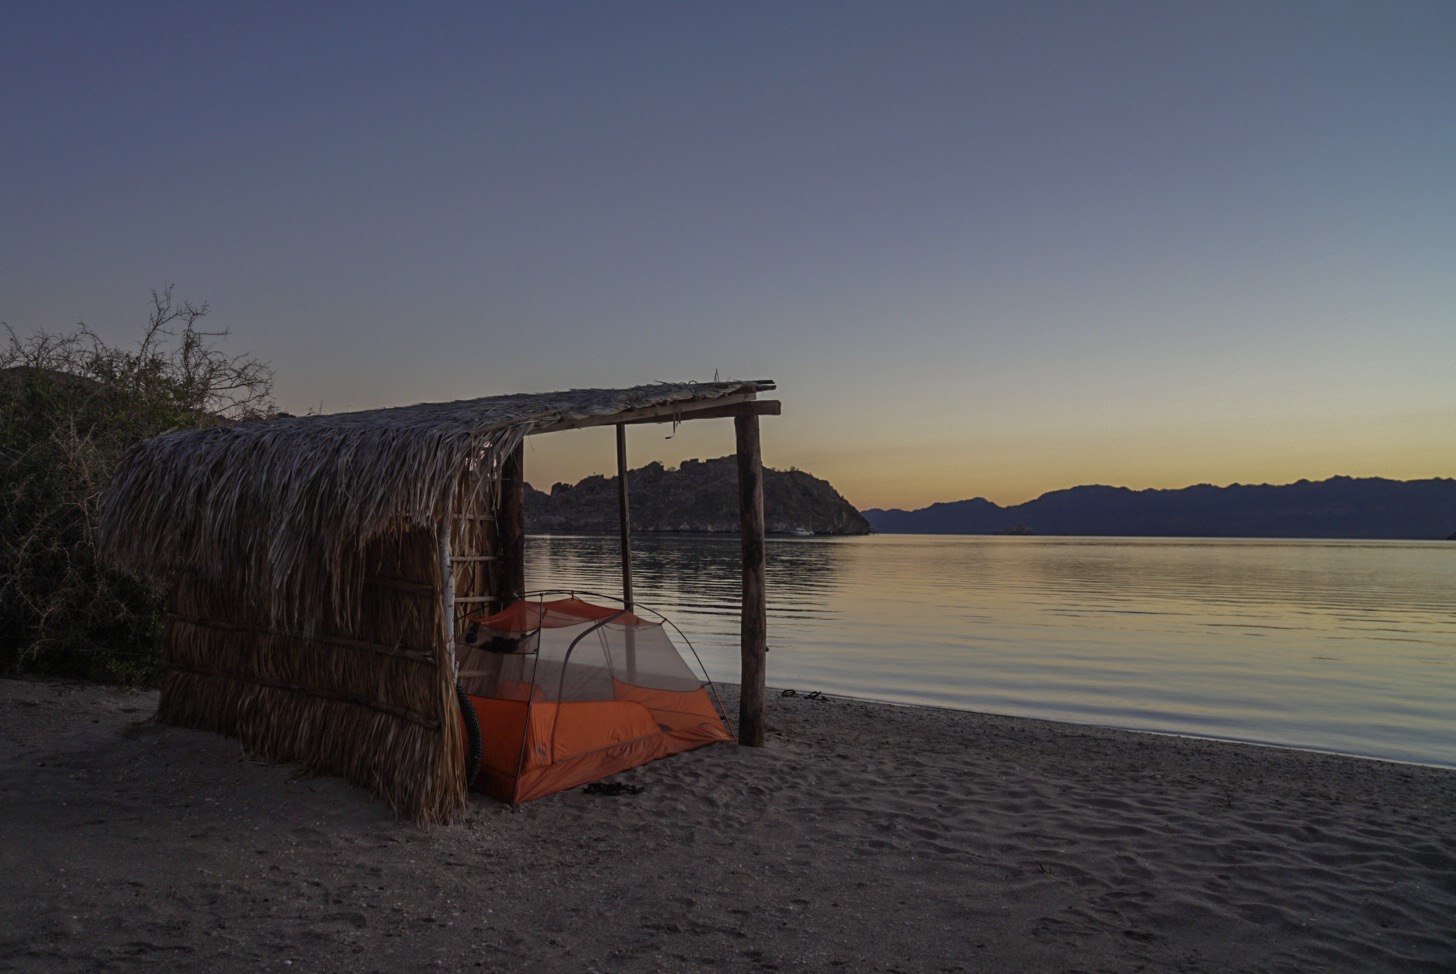 Our tent on the beach at Bahia Concepcion